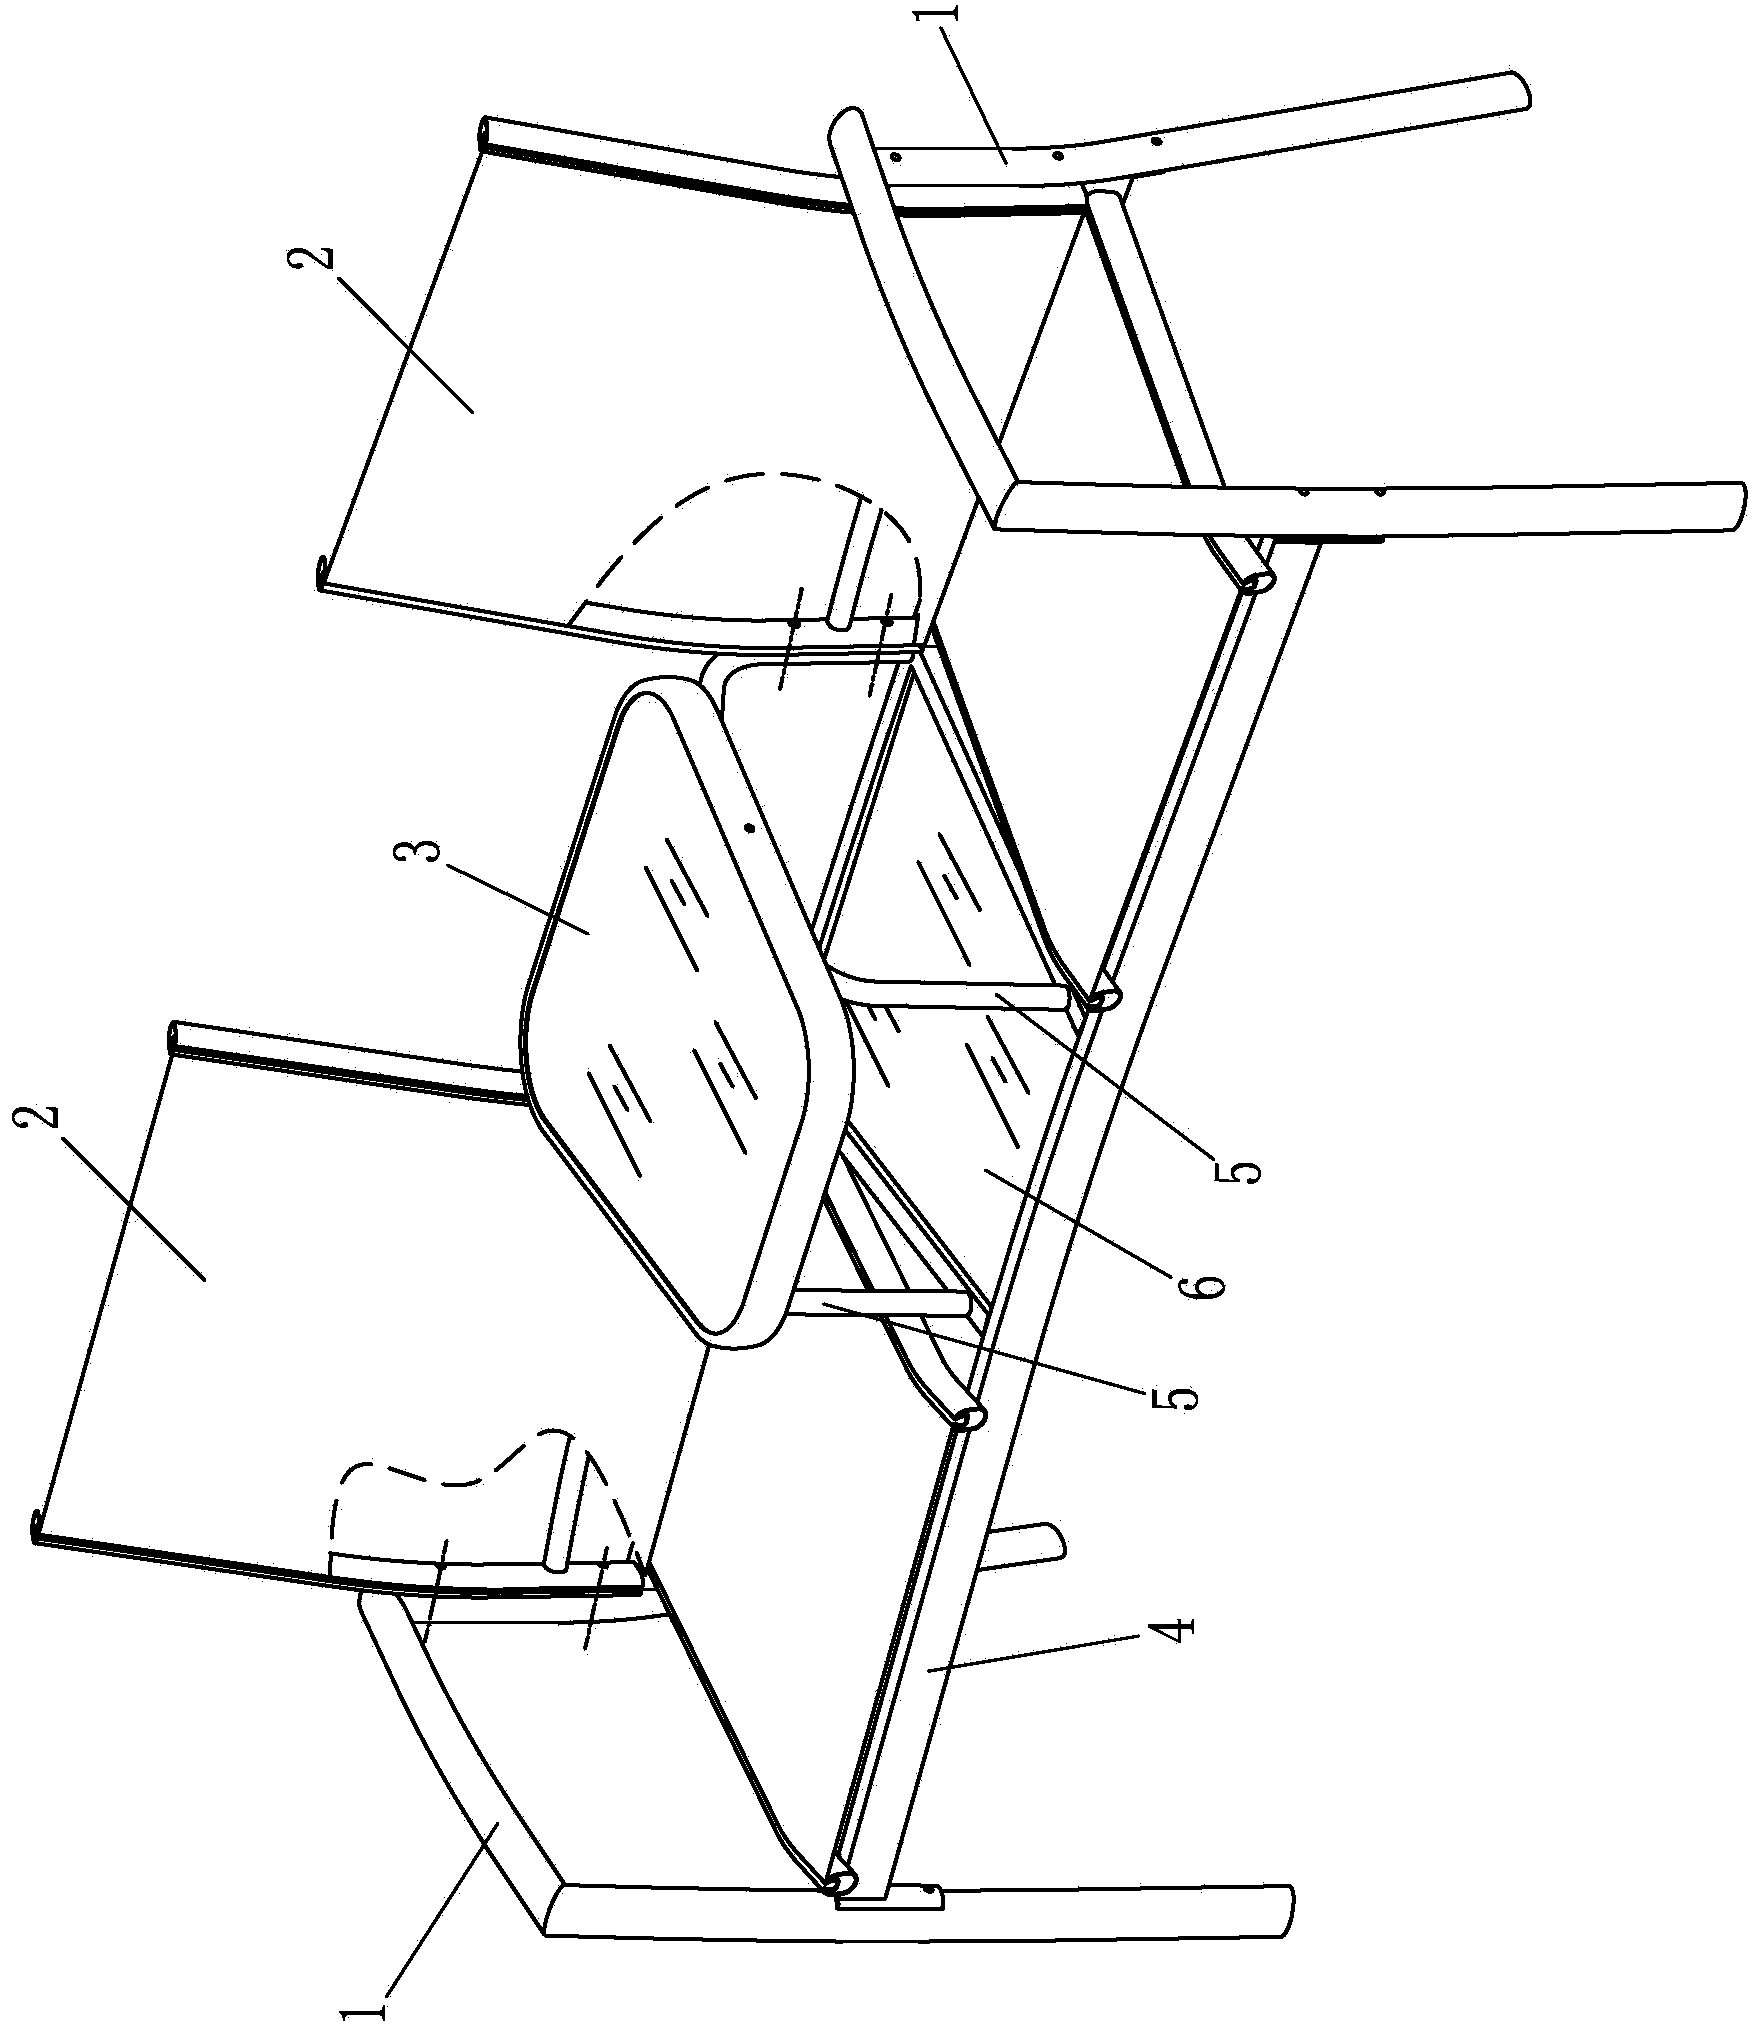 Backrest installation structure of double chair